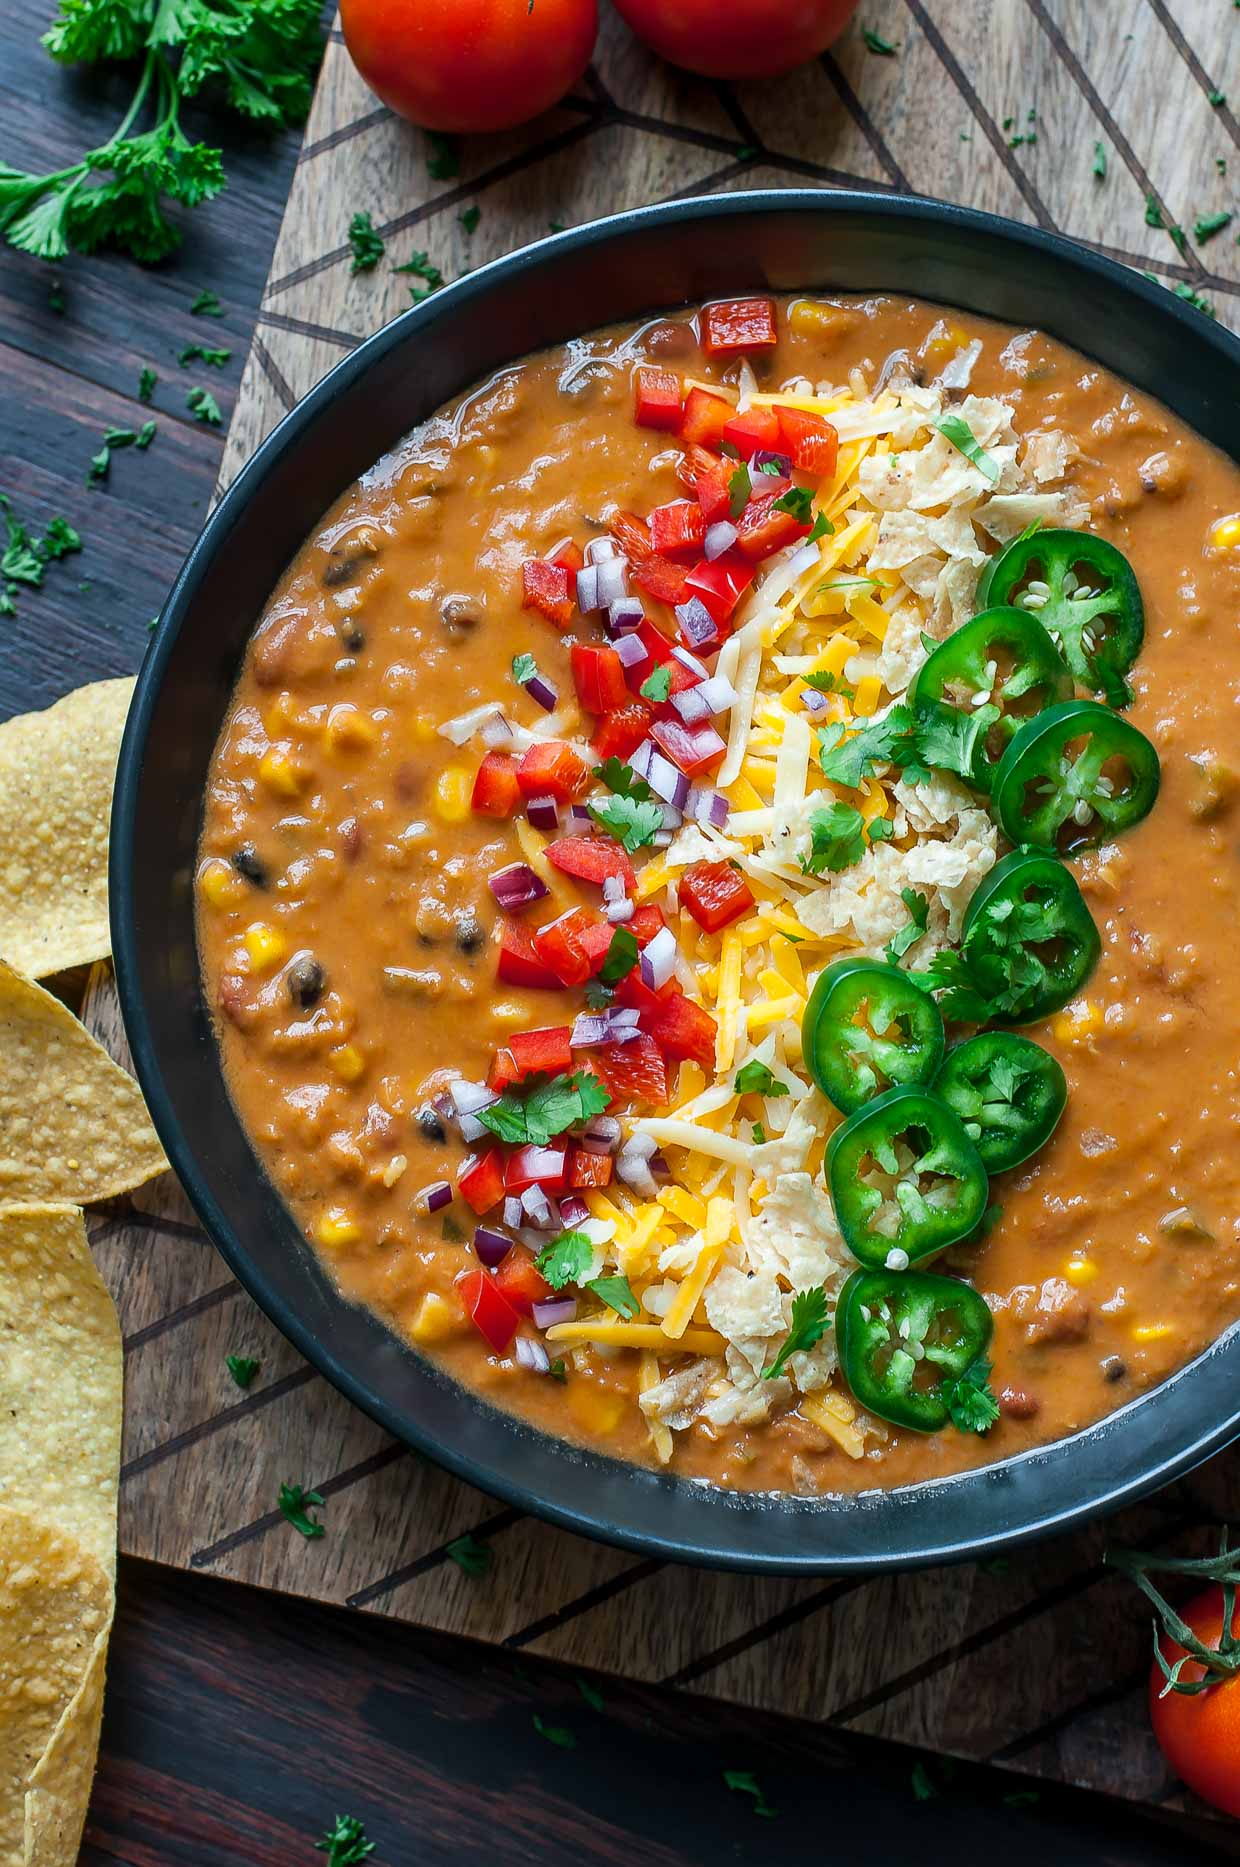 This uber easy and crazy flavorful Vegetarian Lentil Tortilla Soup can be made in a pressure cooker, slow cooker, or on the stove - game on!